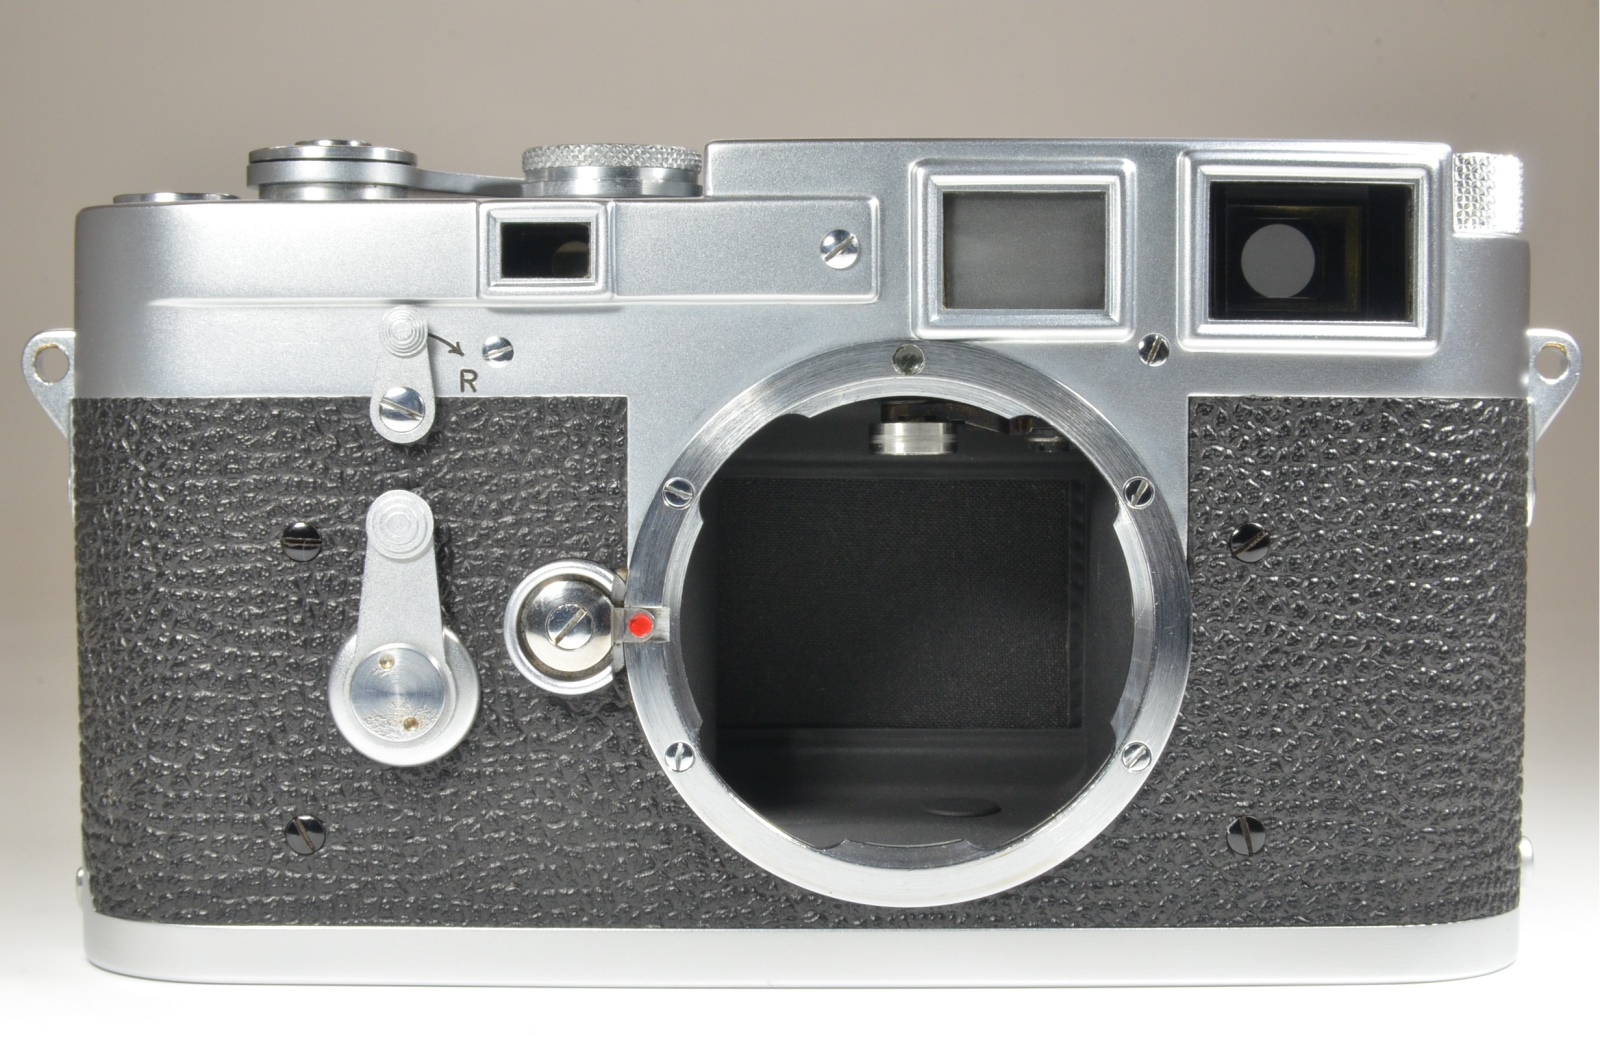 leica m3 double stroke s/n 756562 year 1955 with strap from japan